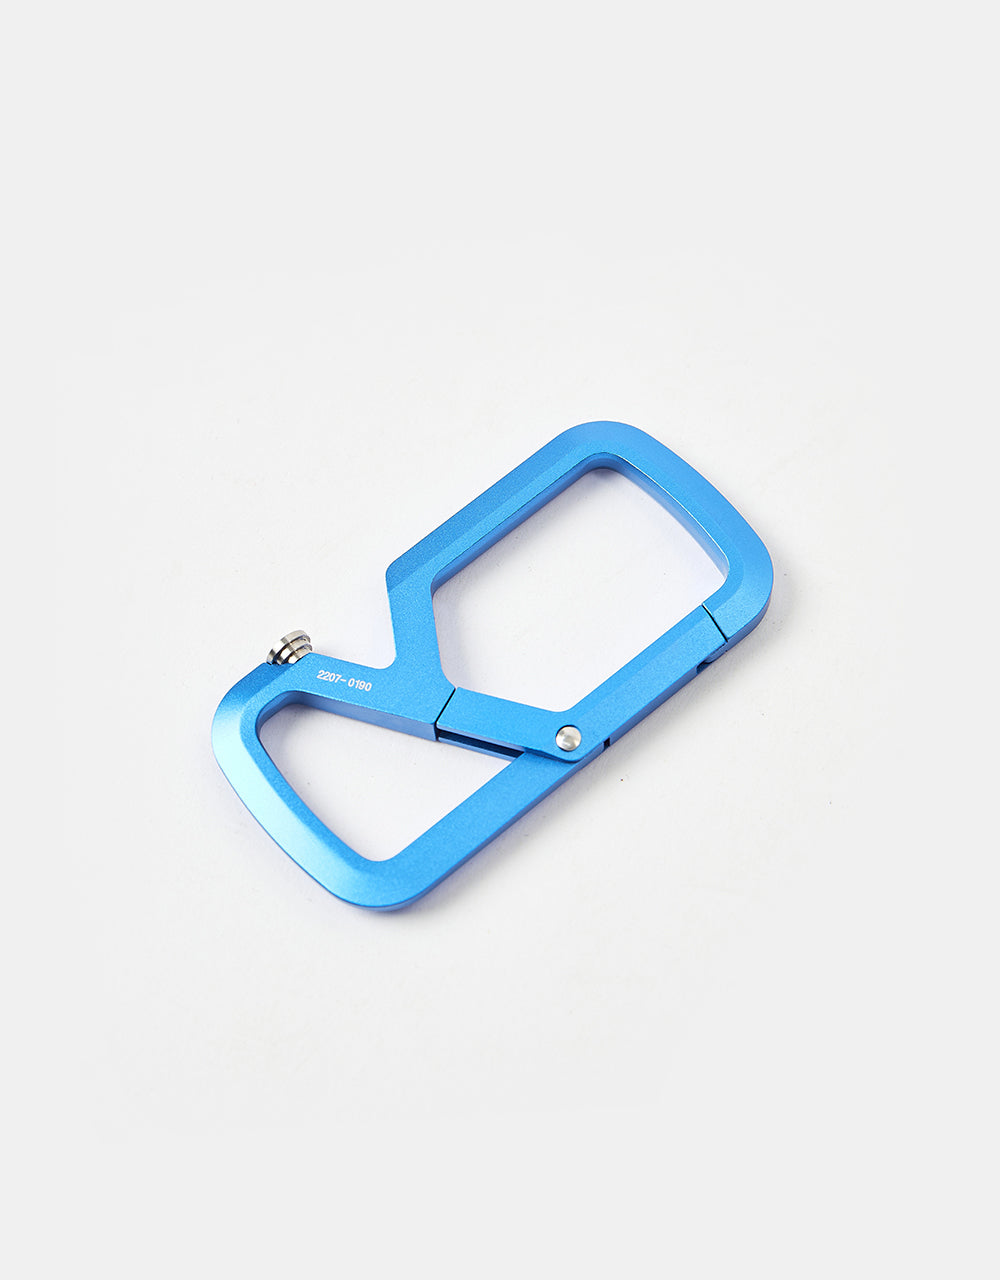 James The Mehlville 'Carabiner' Keychain - Cerulean/Stainless